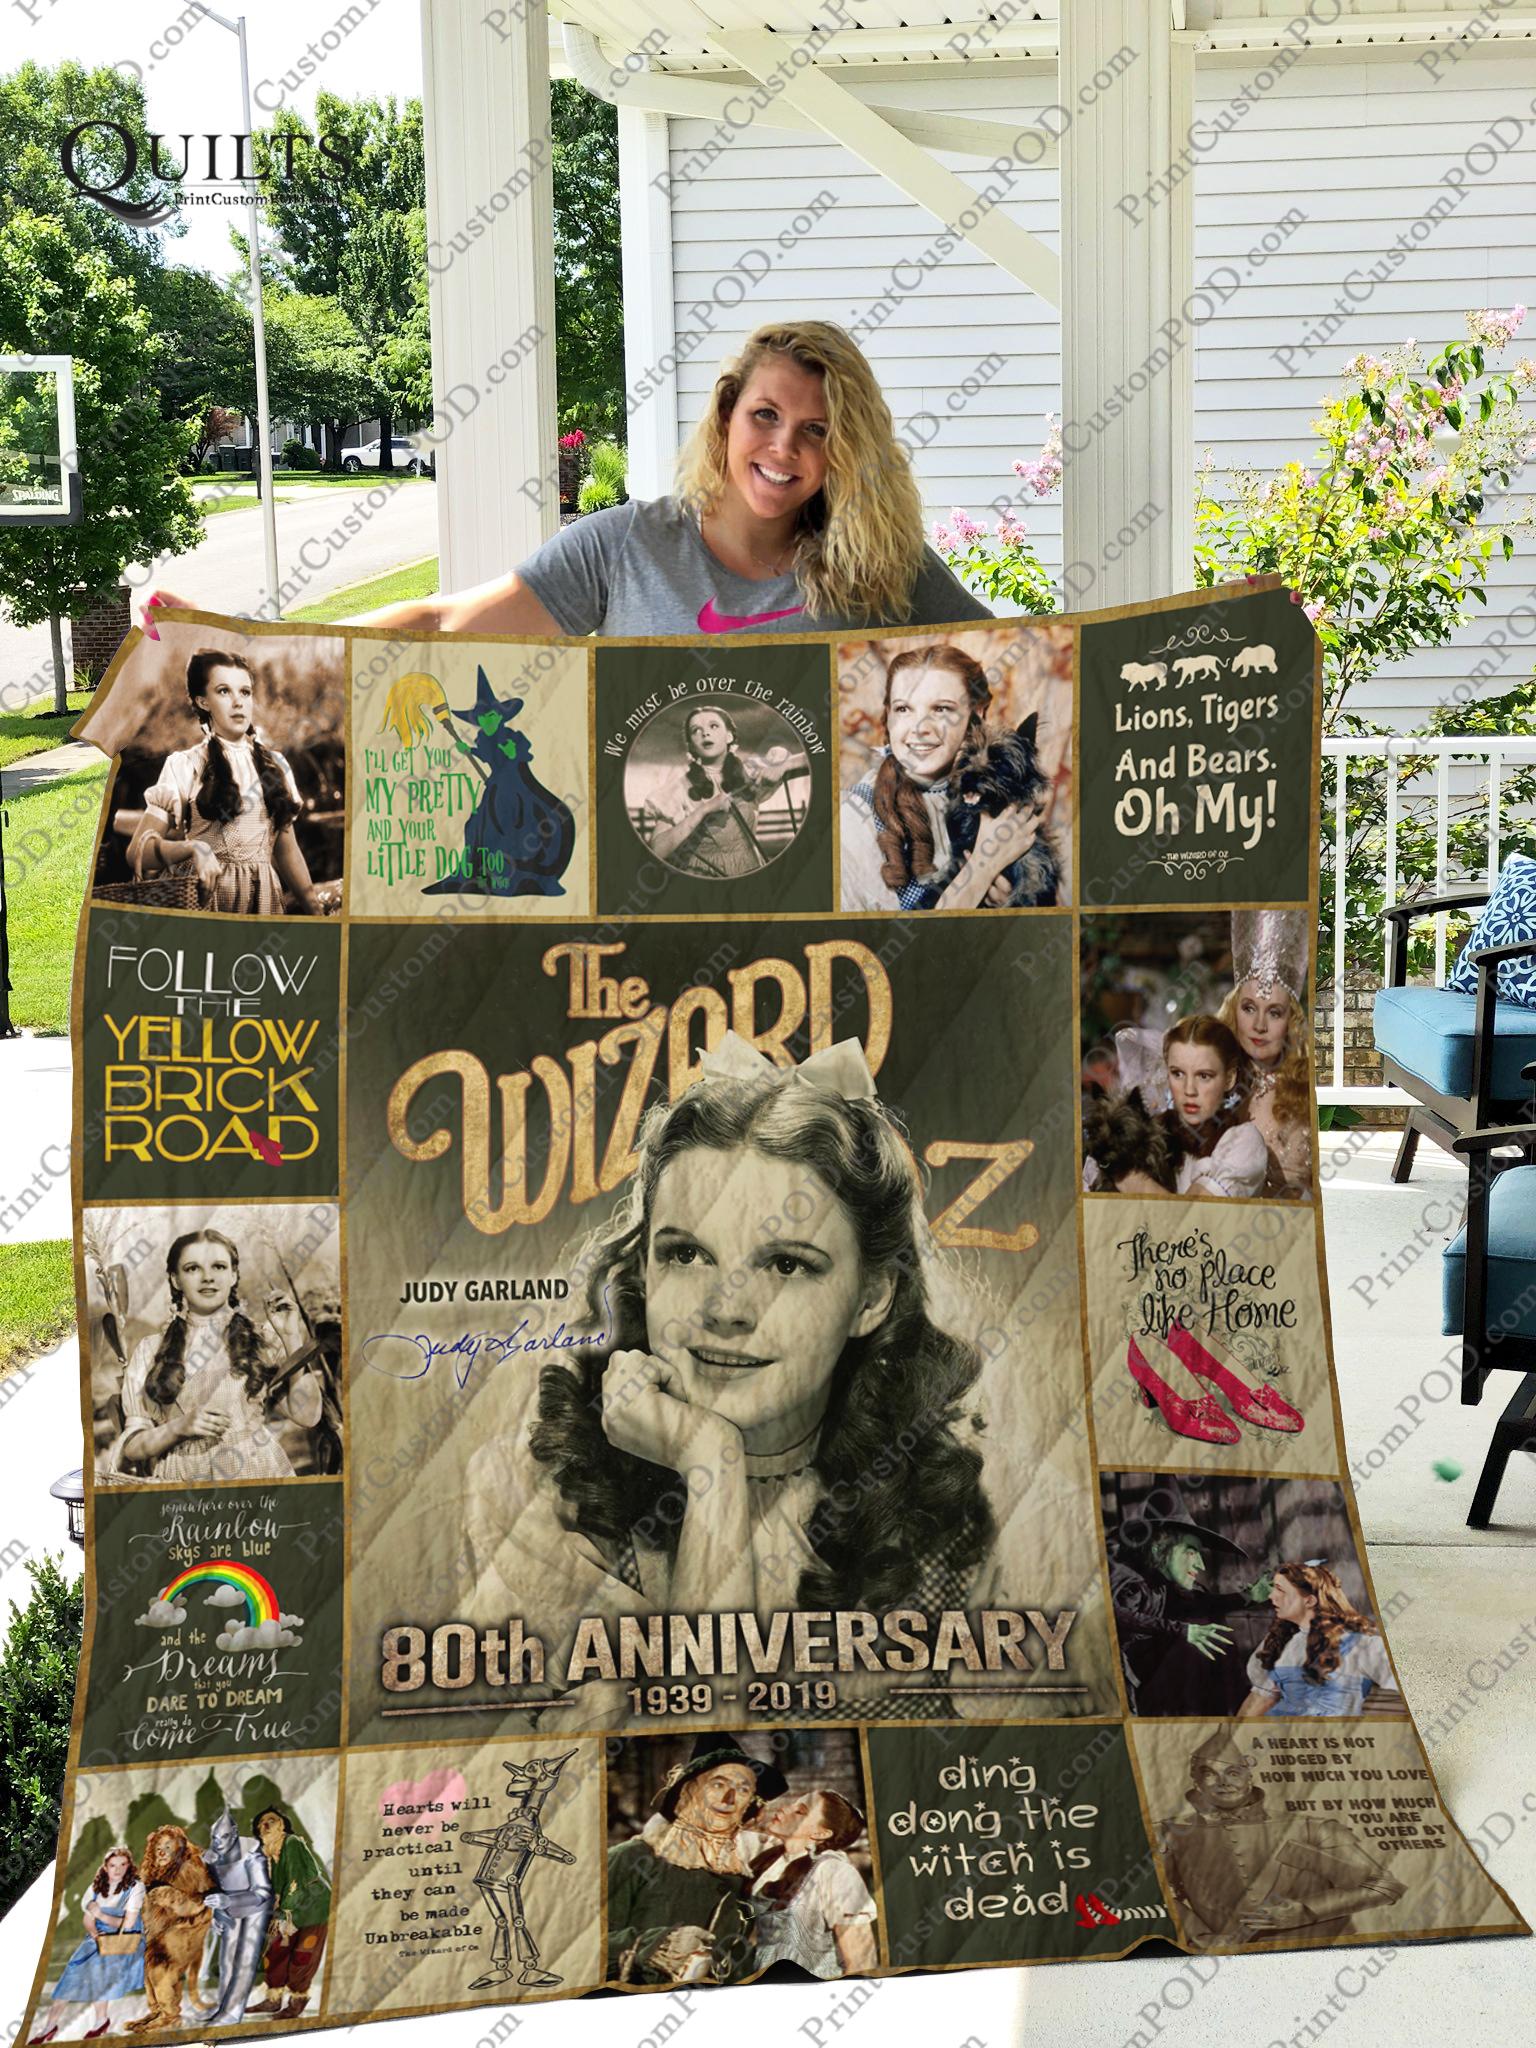 The wizard of oz judy garland 80th anniversary quilt - queen